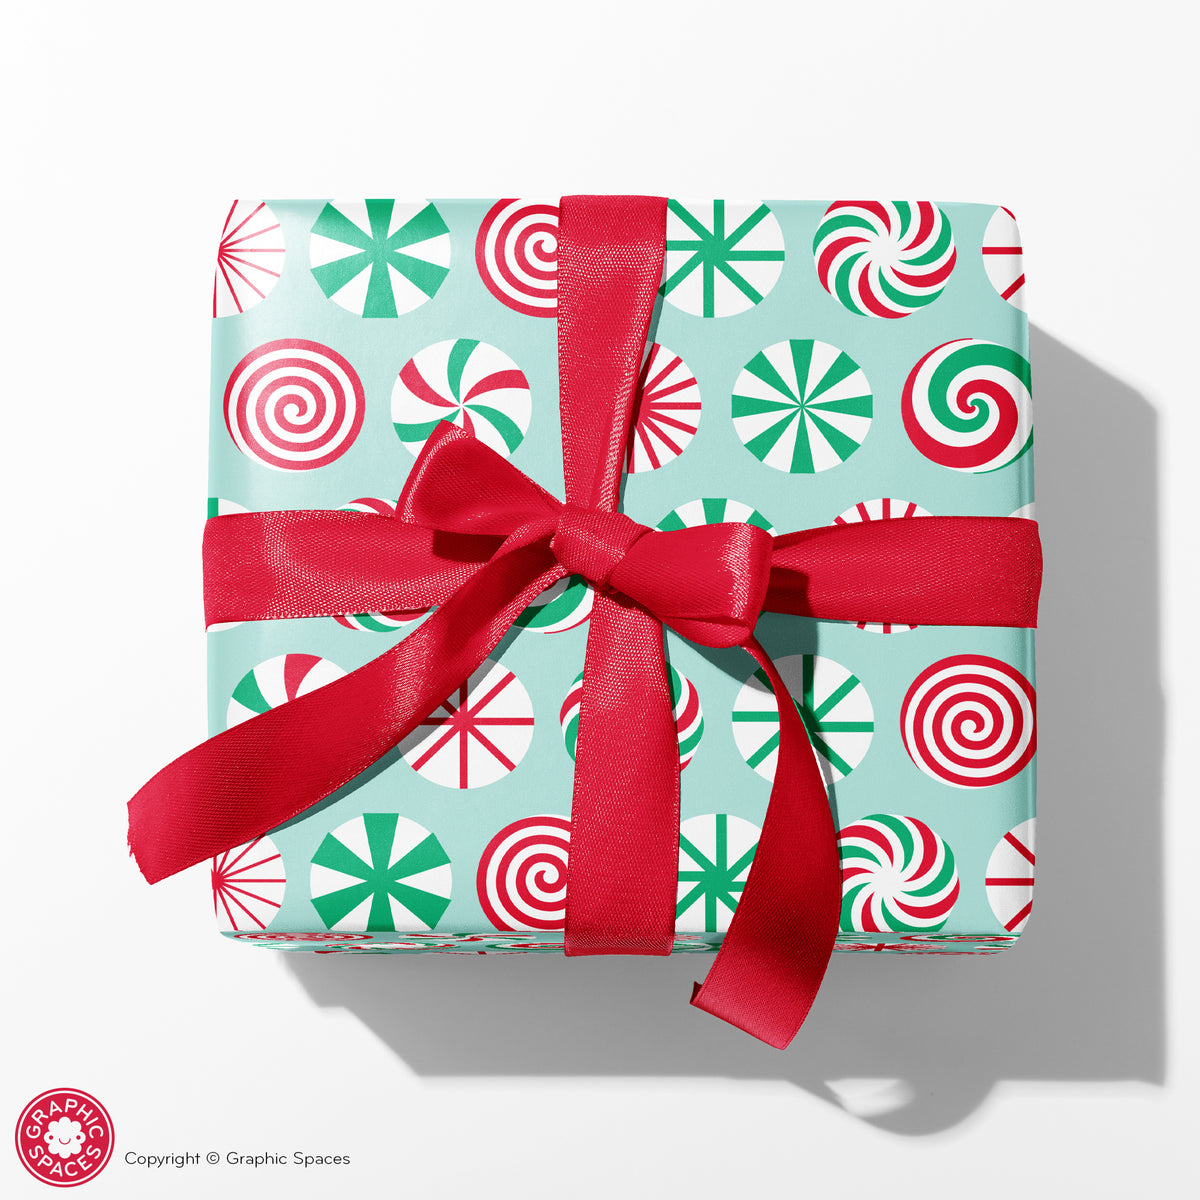 Peppermint Candy Christmas Wrapping Paper - RED/GREEN